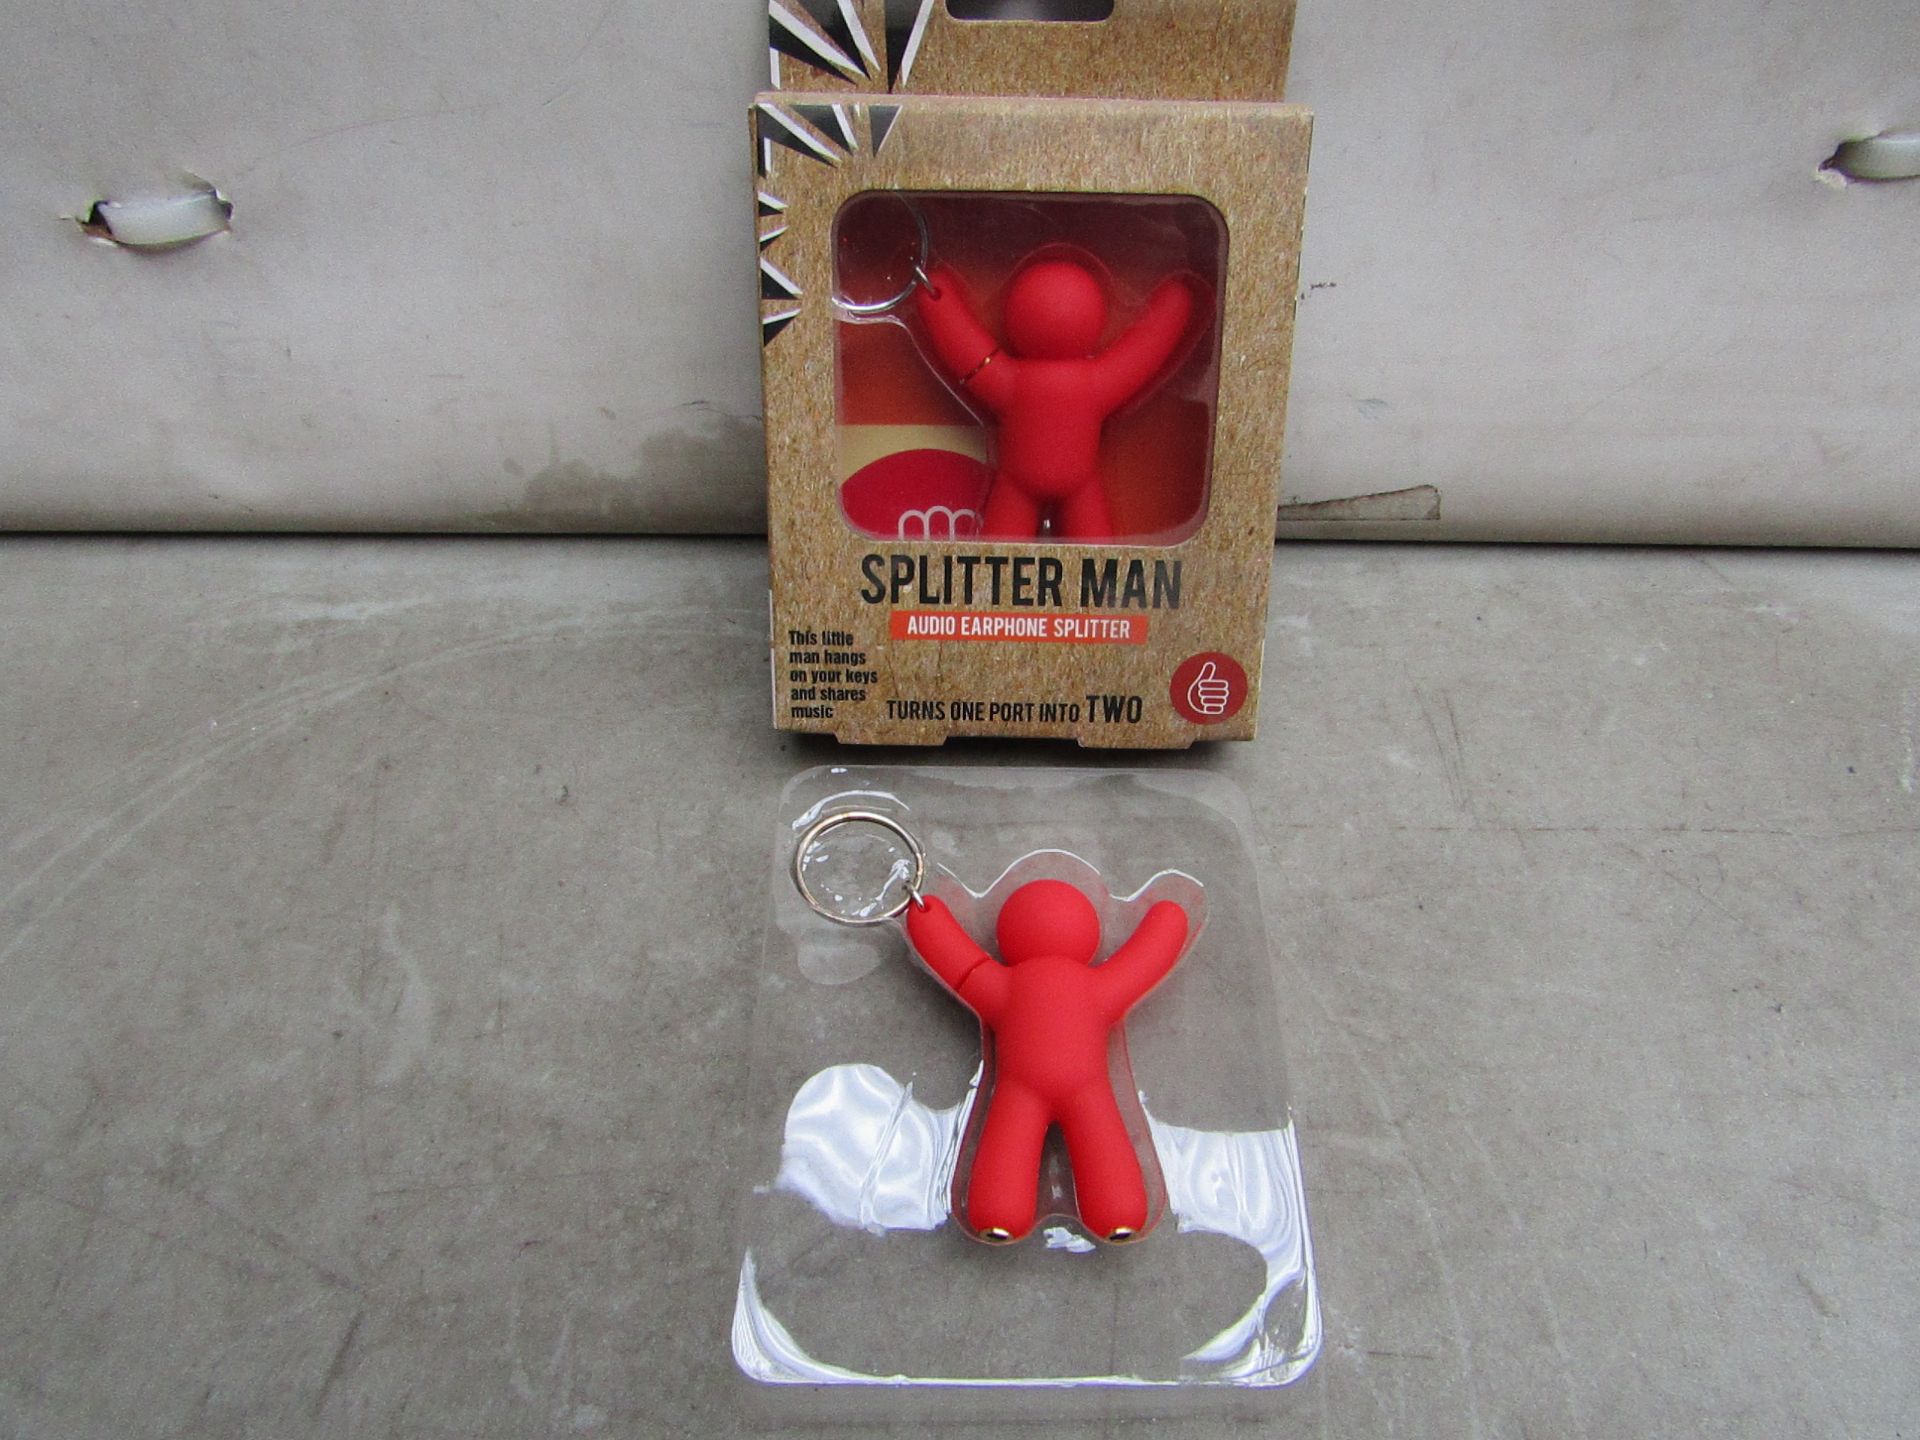 Box of 24x Splitter man Key Rings, enables aux cable to be shared into a device while being store on